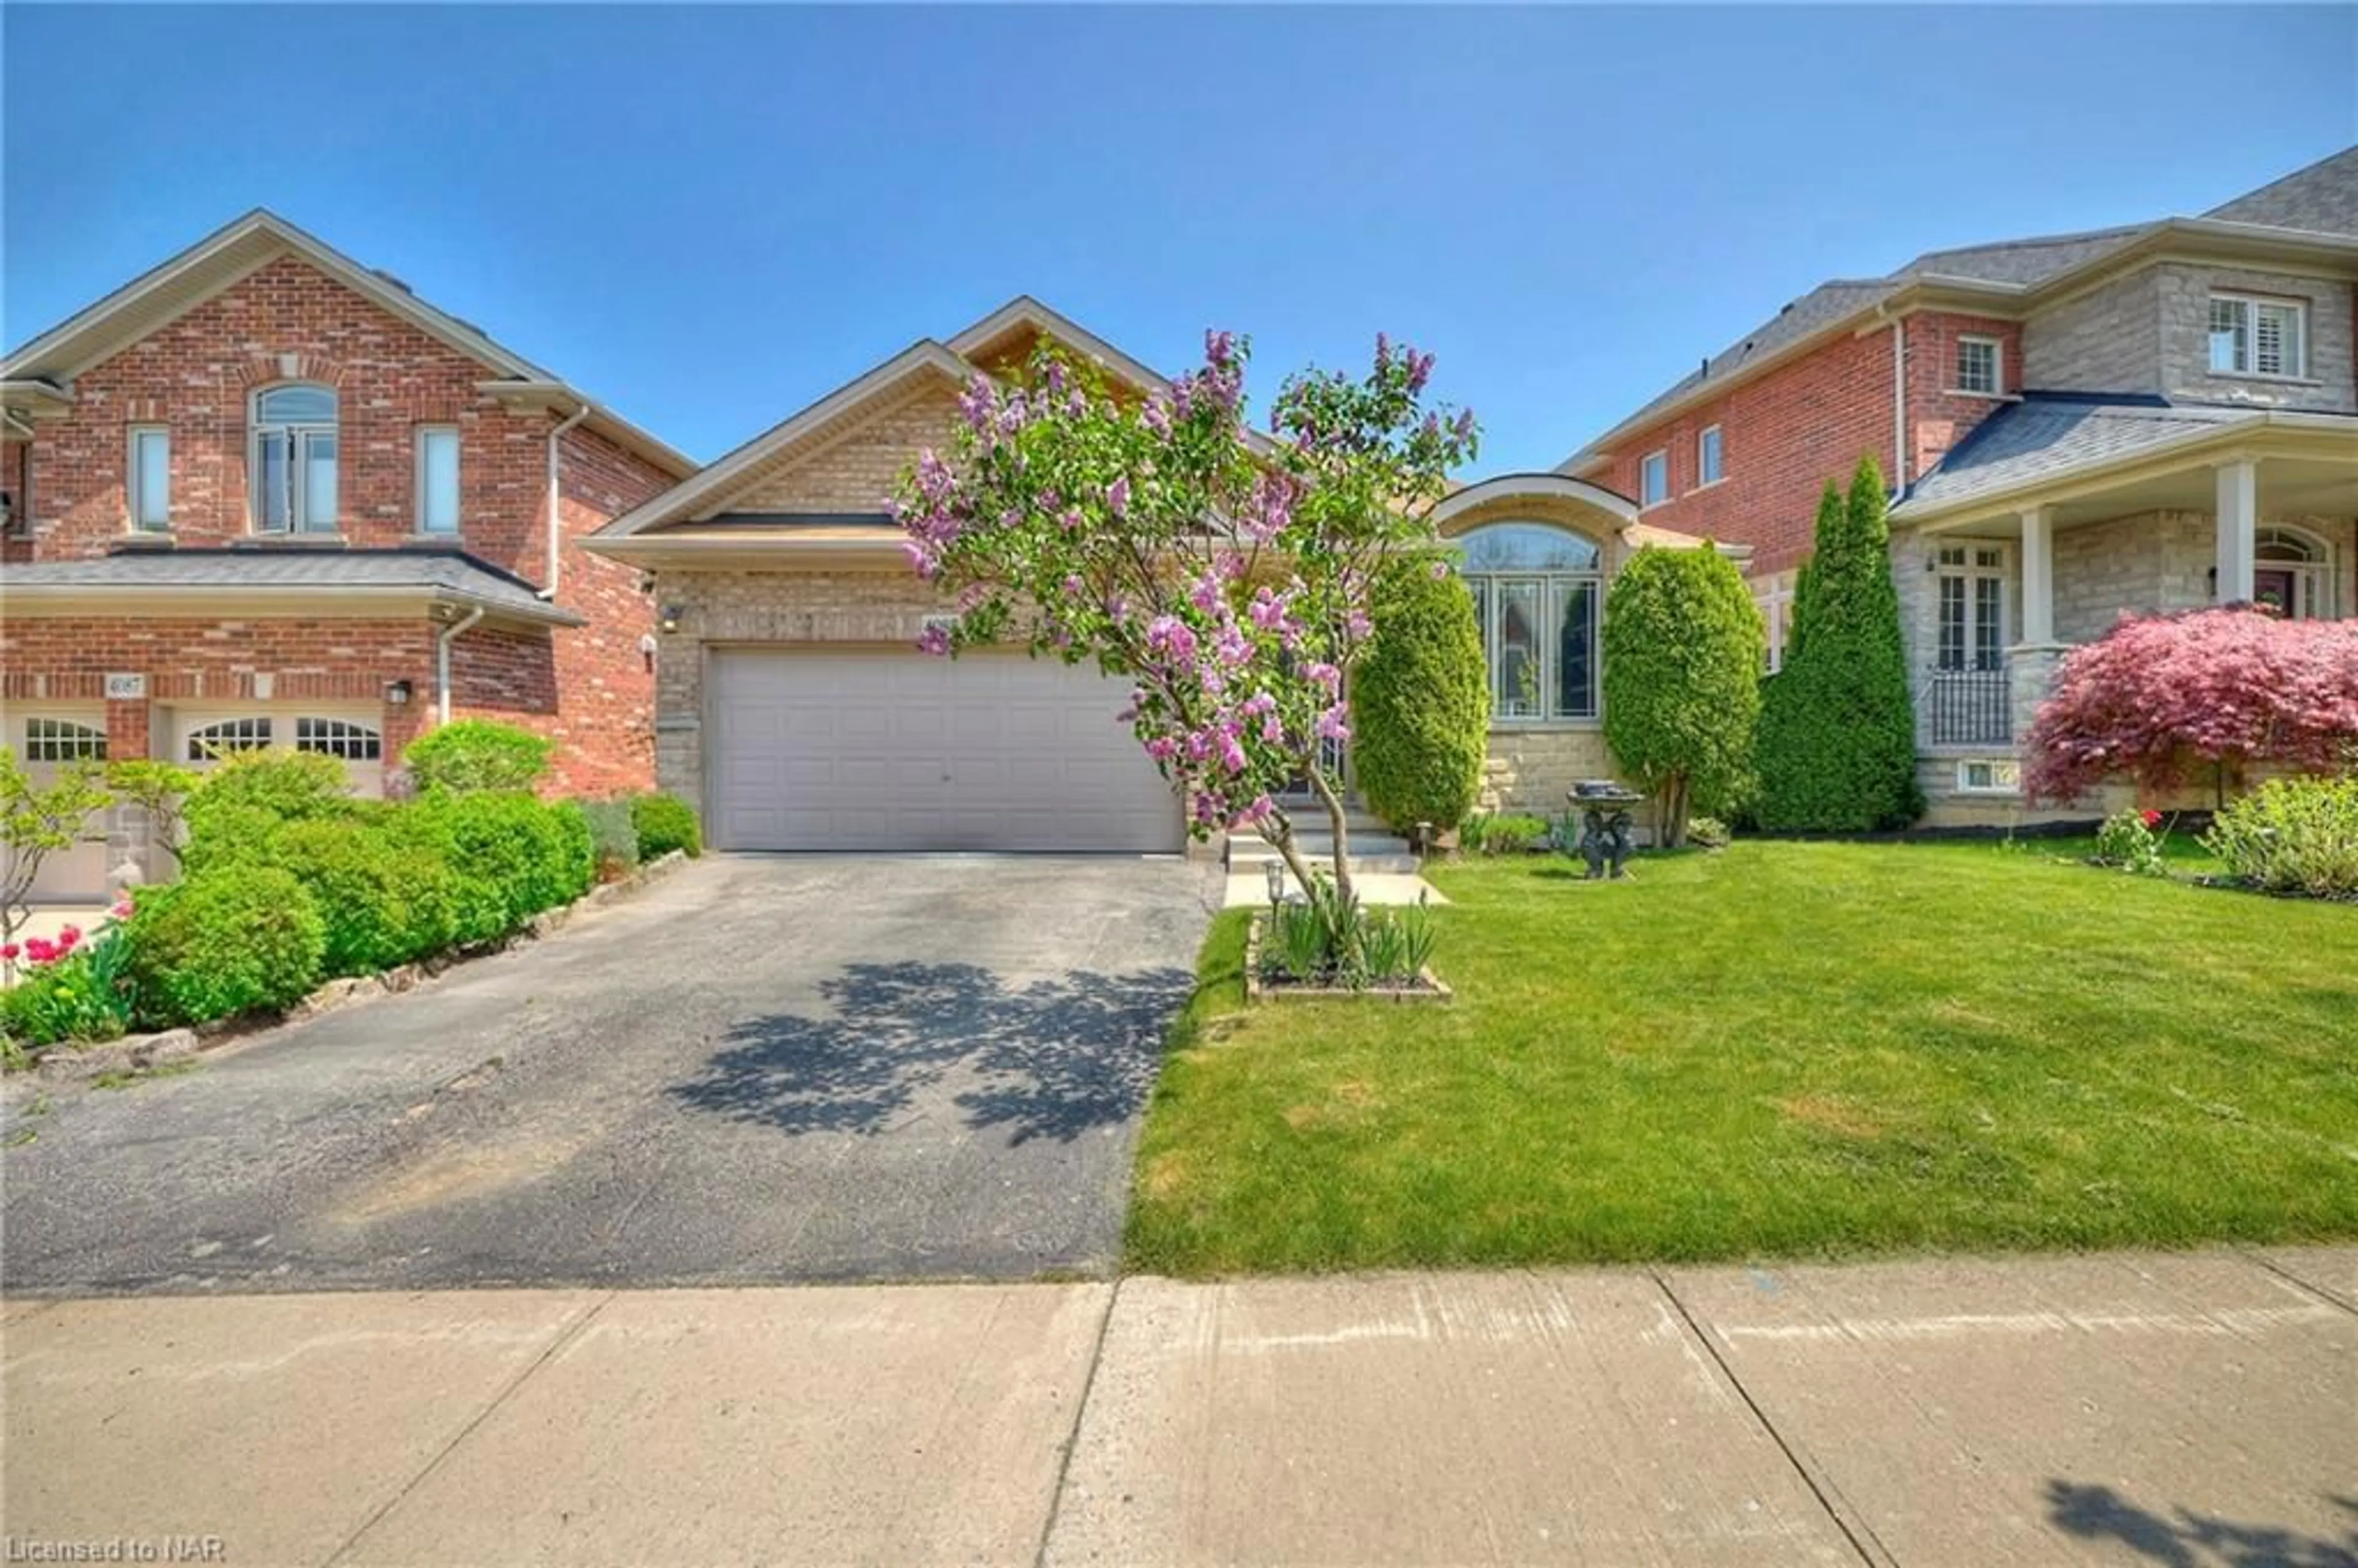 Frontside or backside of a home for 4085 Highland Park Dr, Lincoln Ontario L0R 1B7